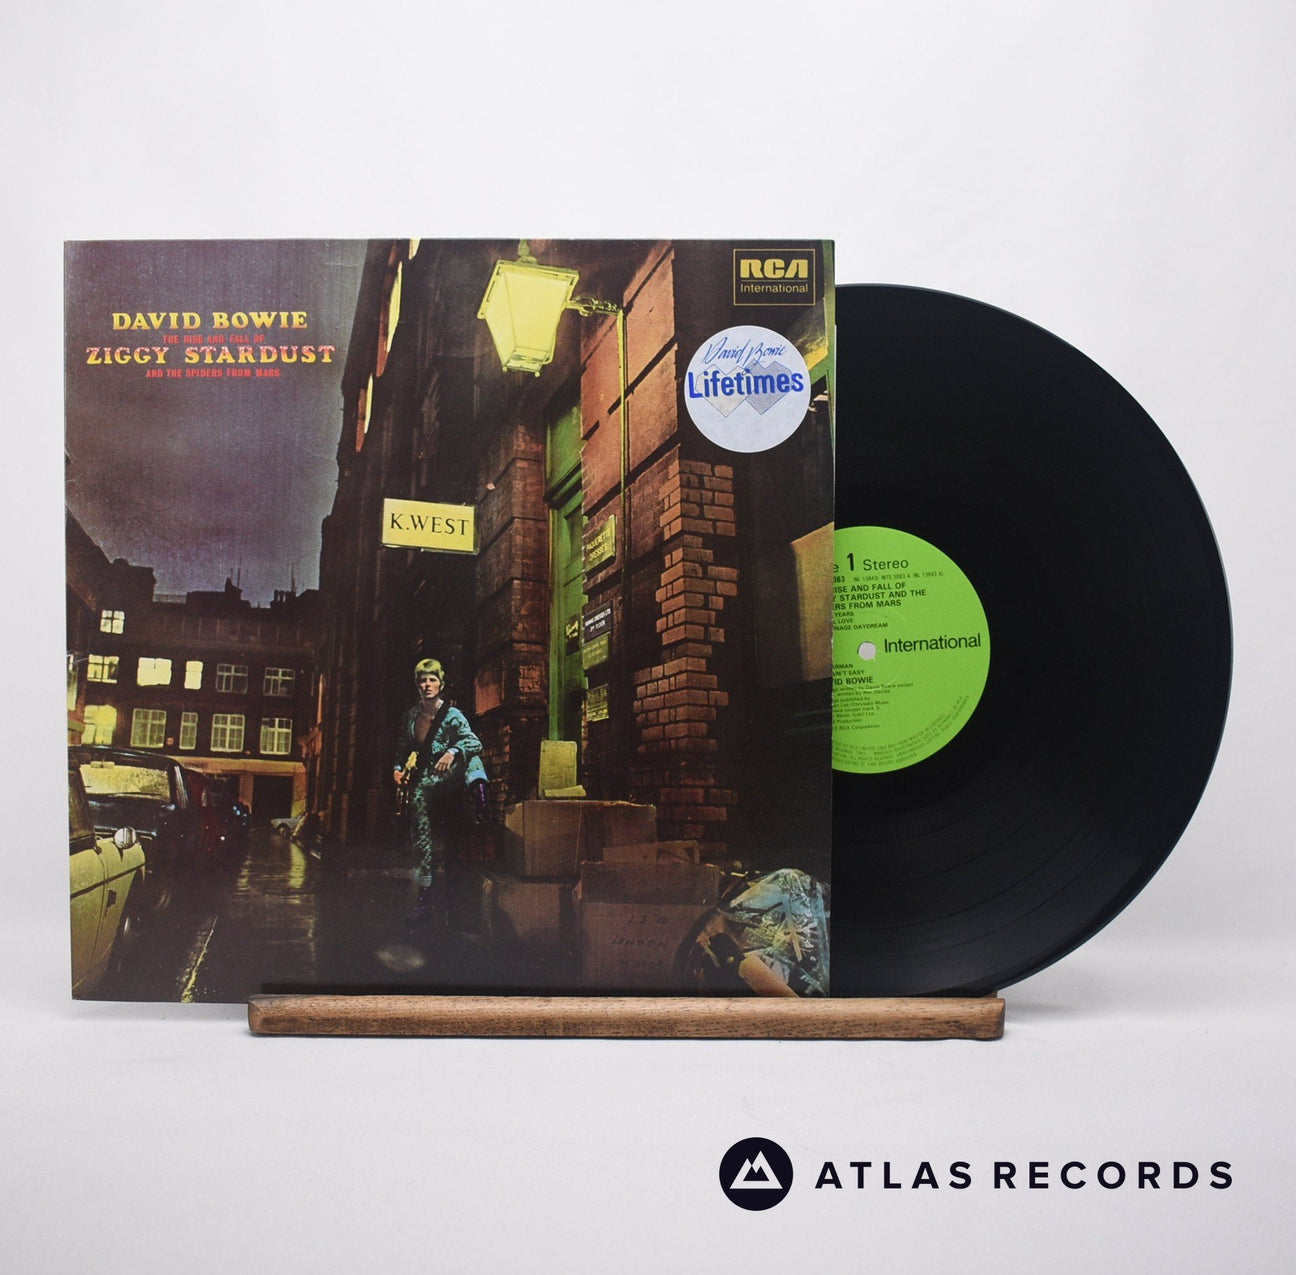 David Bowie The Rise And Fall Of Ziggy Stardust And The Spiders From Mars LP Vinyl Record - Front Cover & Record